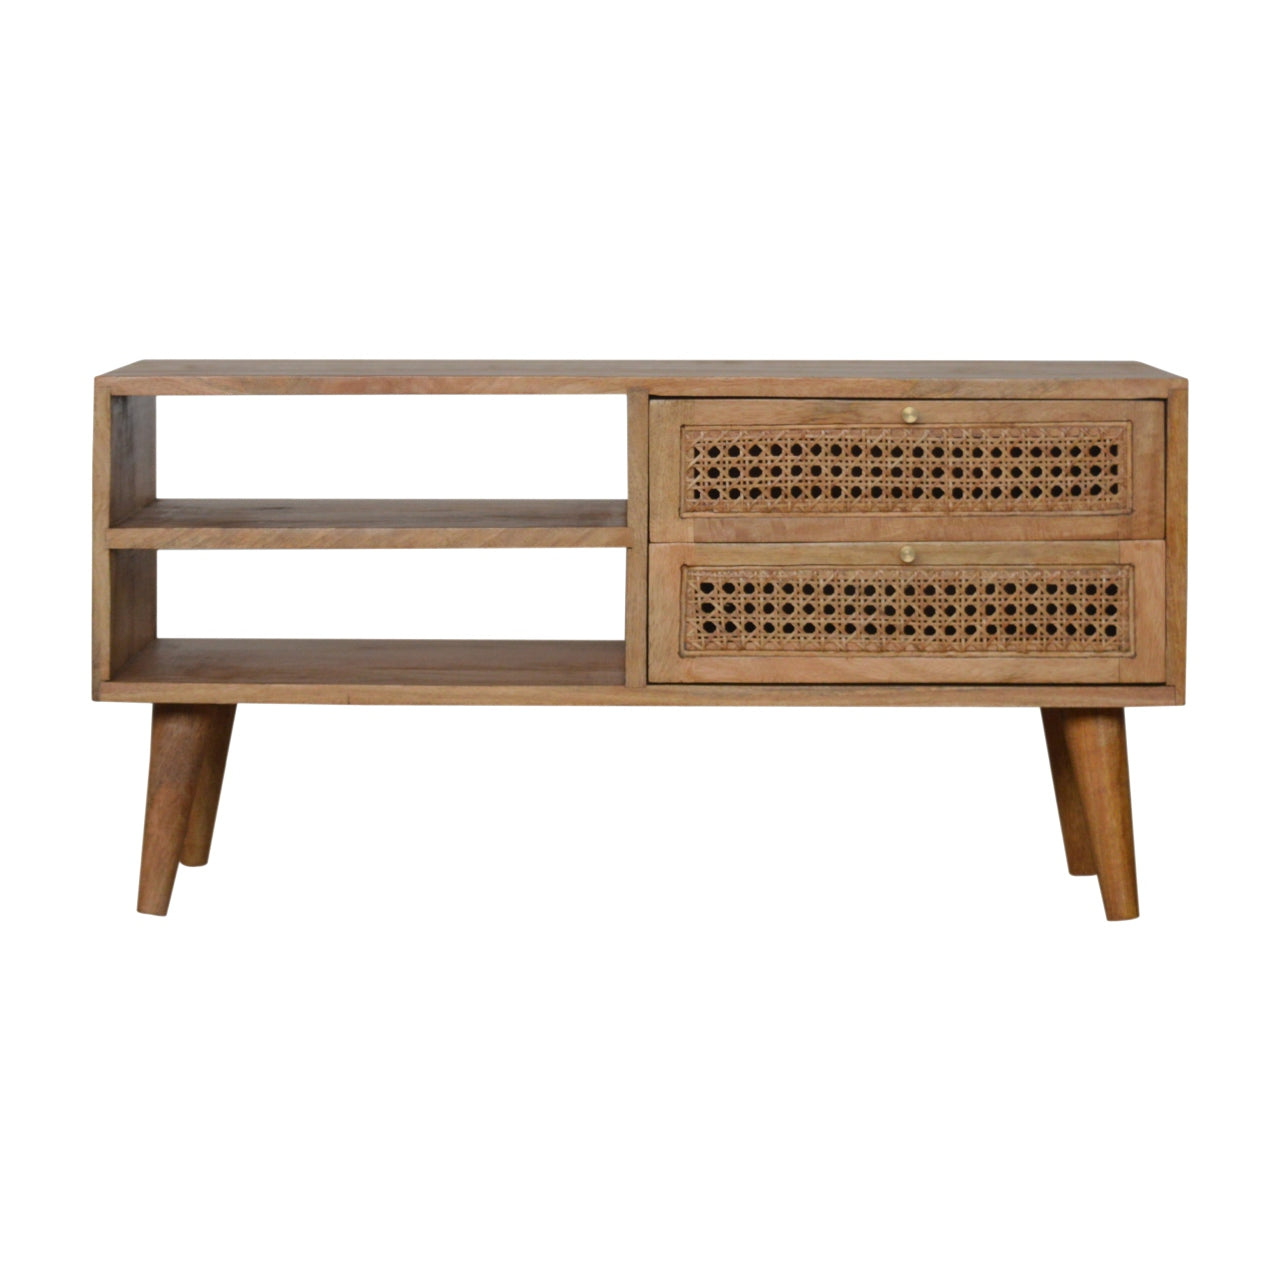 Woven Rattan Solid Wood TV Stand In Oak Finish